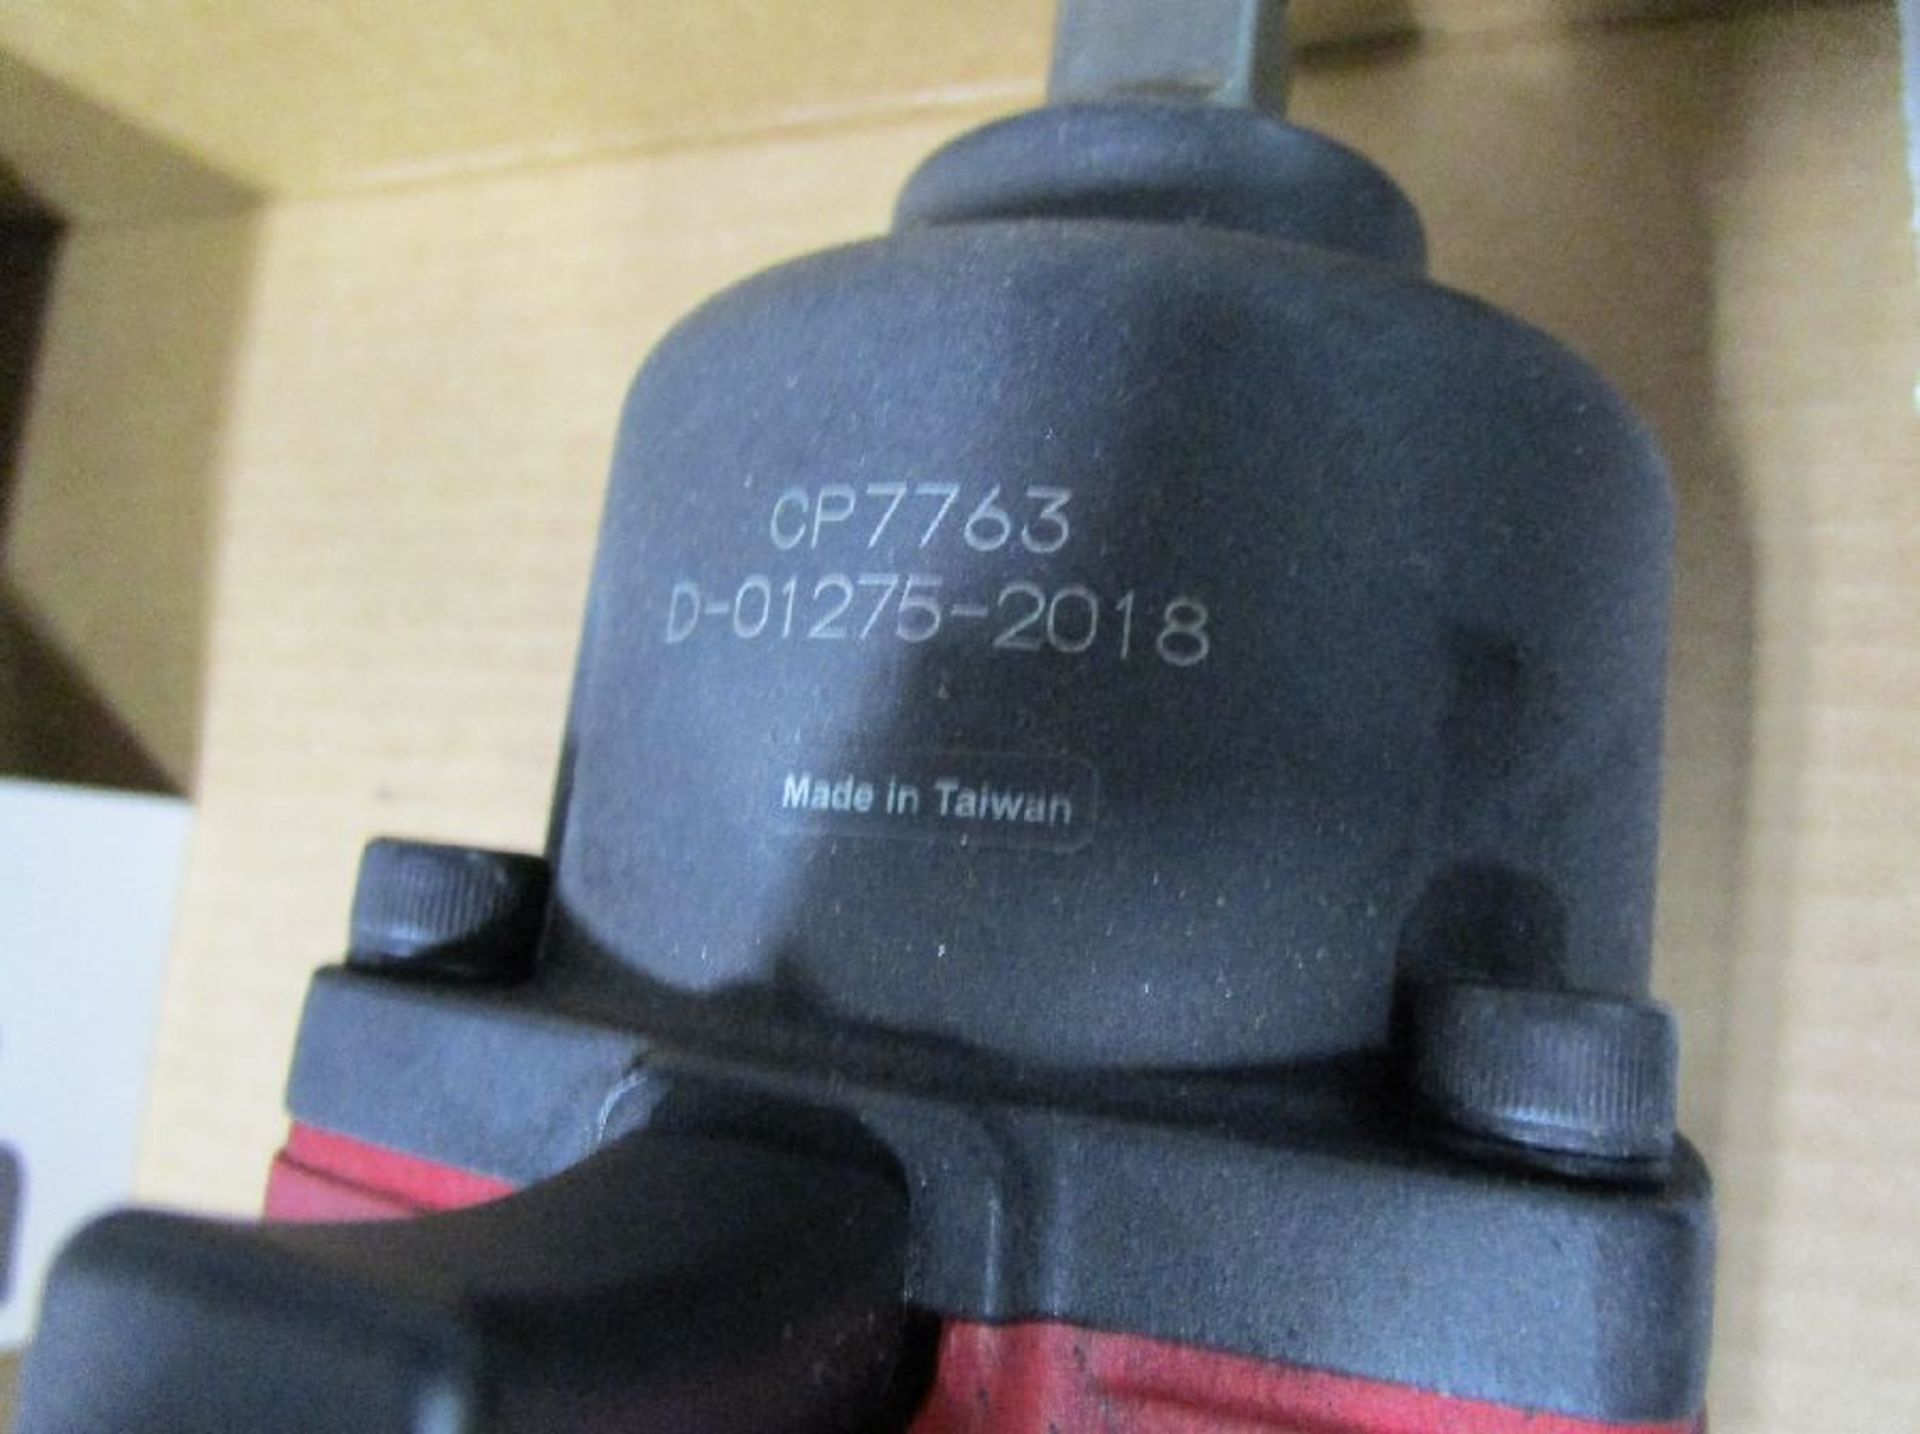 Chicago Pneumatic Model CP7763 3/4"" Drive Pneumatic Impact Wrench - Image 2 of 5